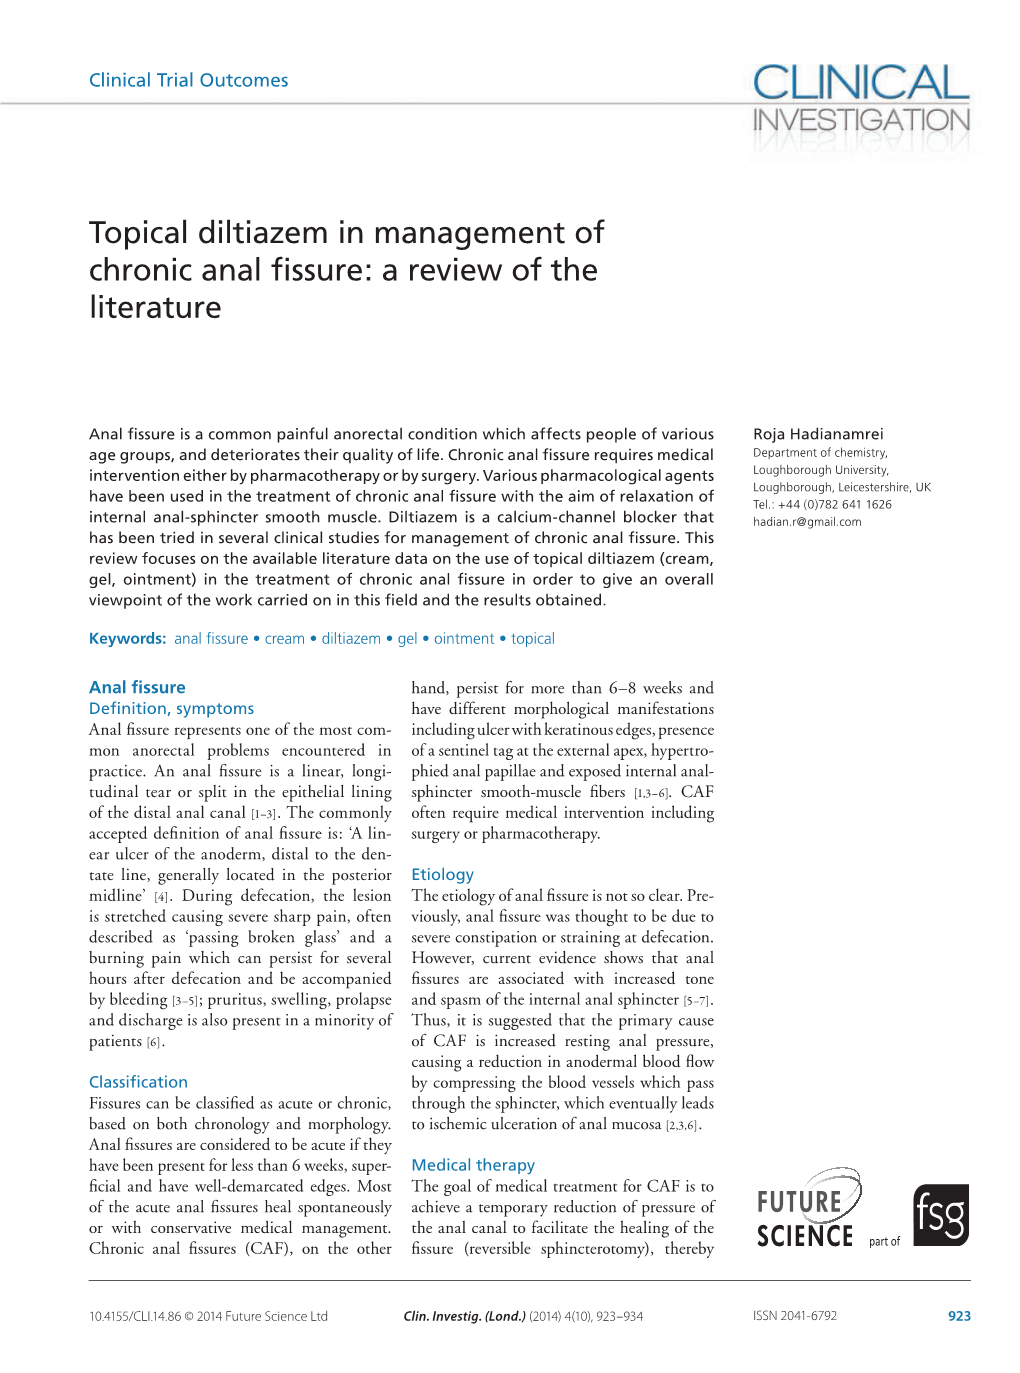 Topical Diltiazem in Management of Chronic Anal Fissure: a Review of the Literature